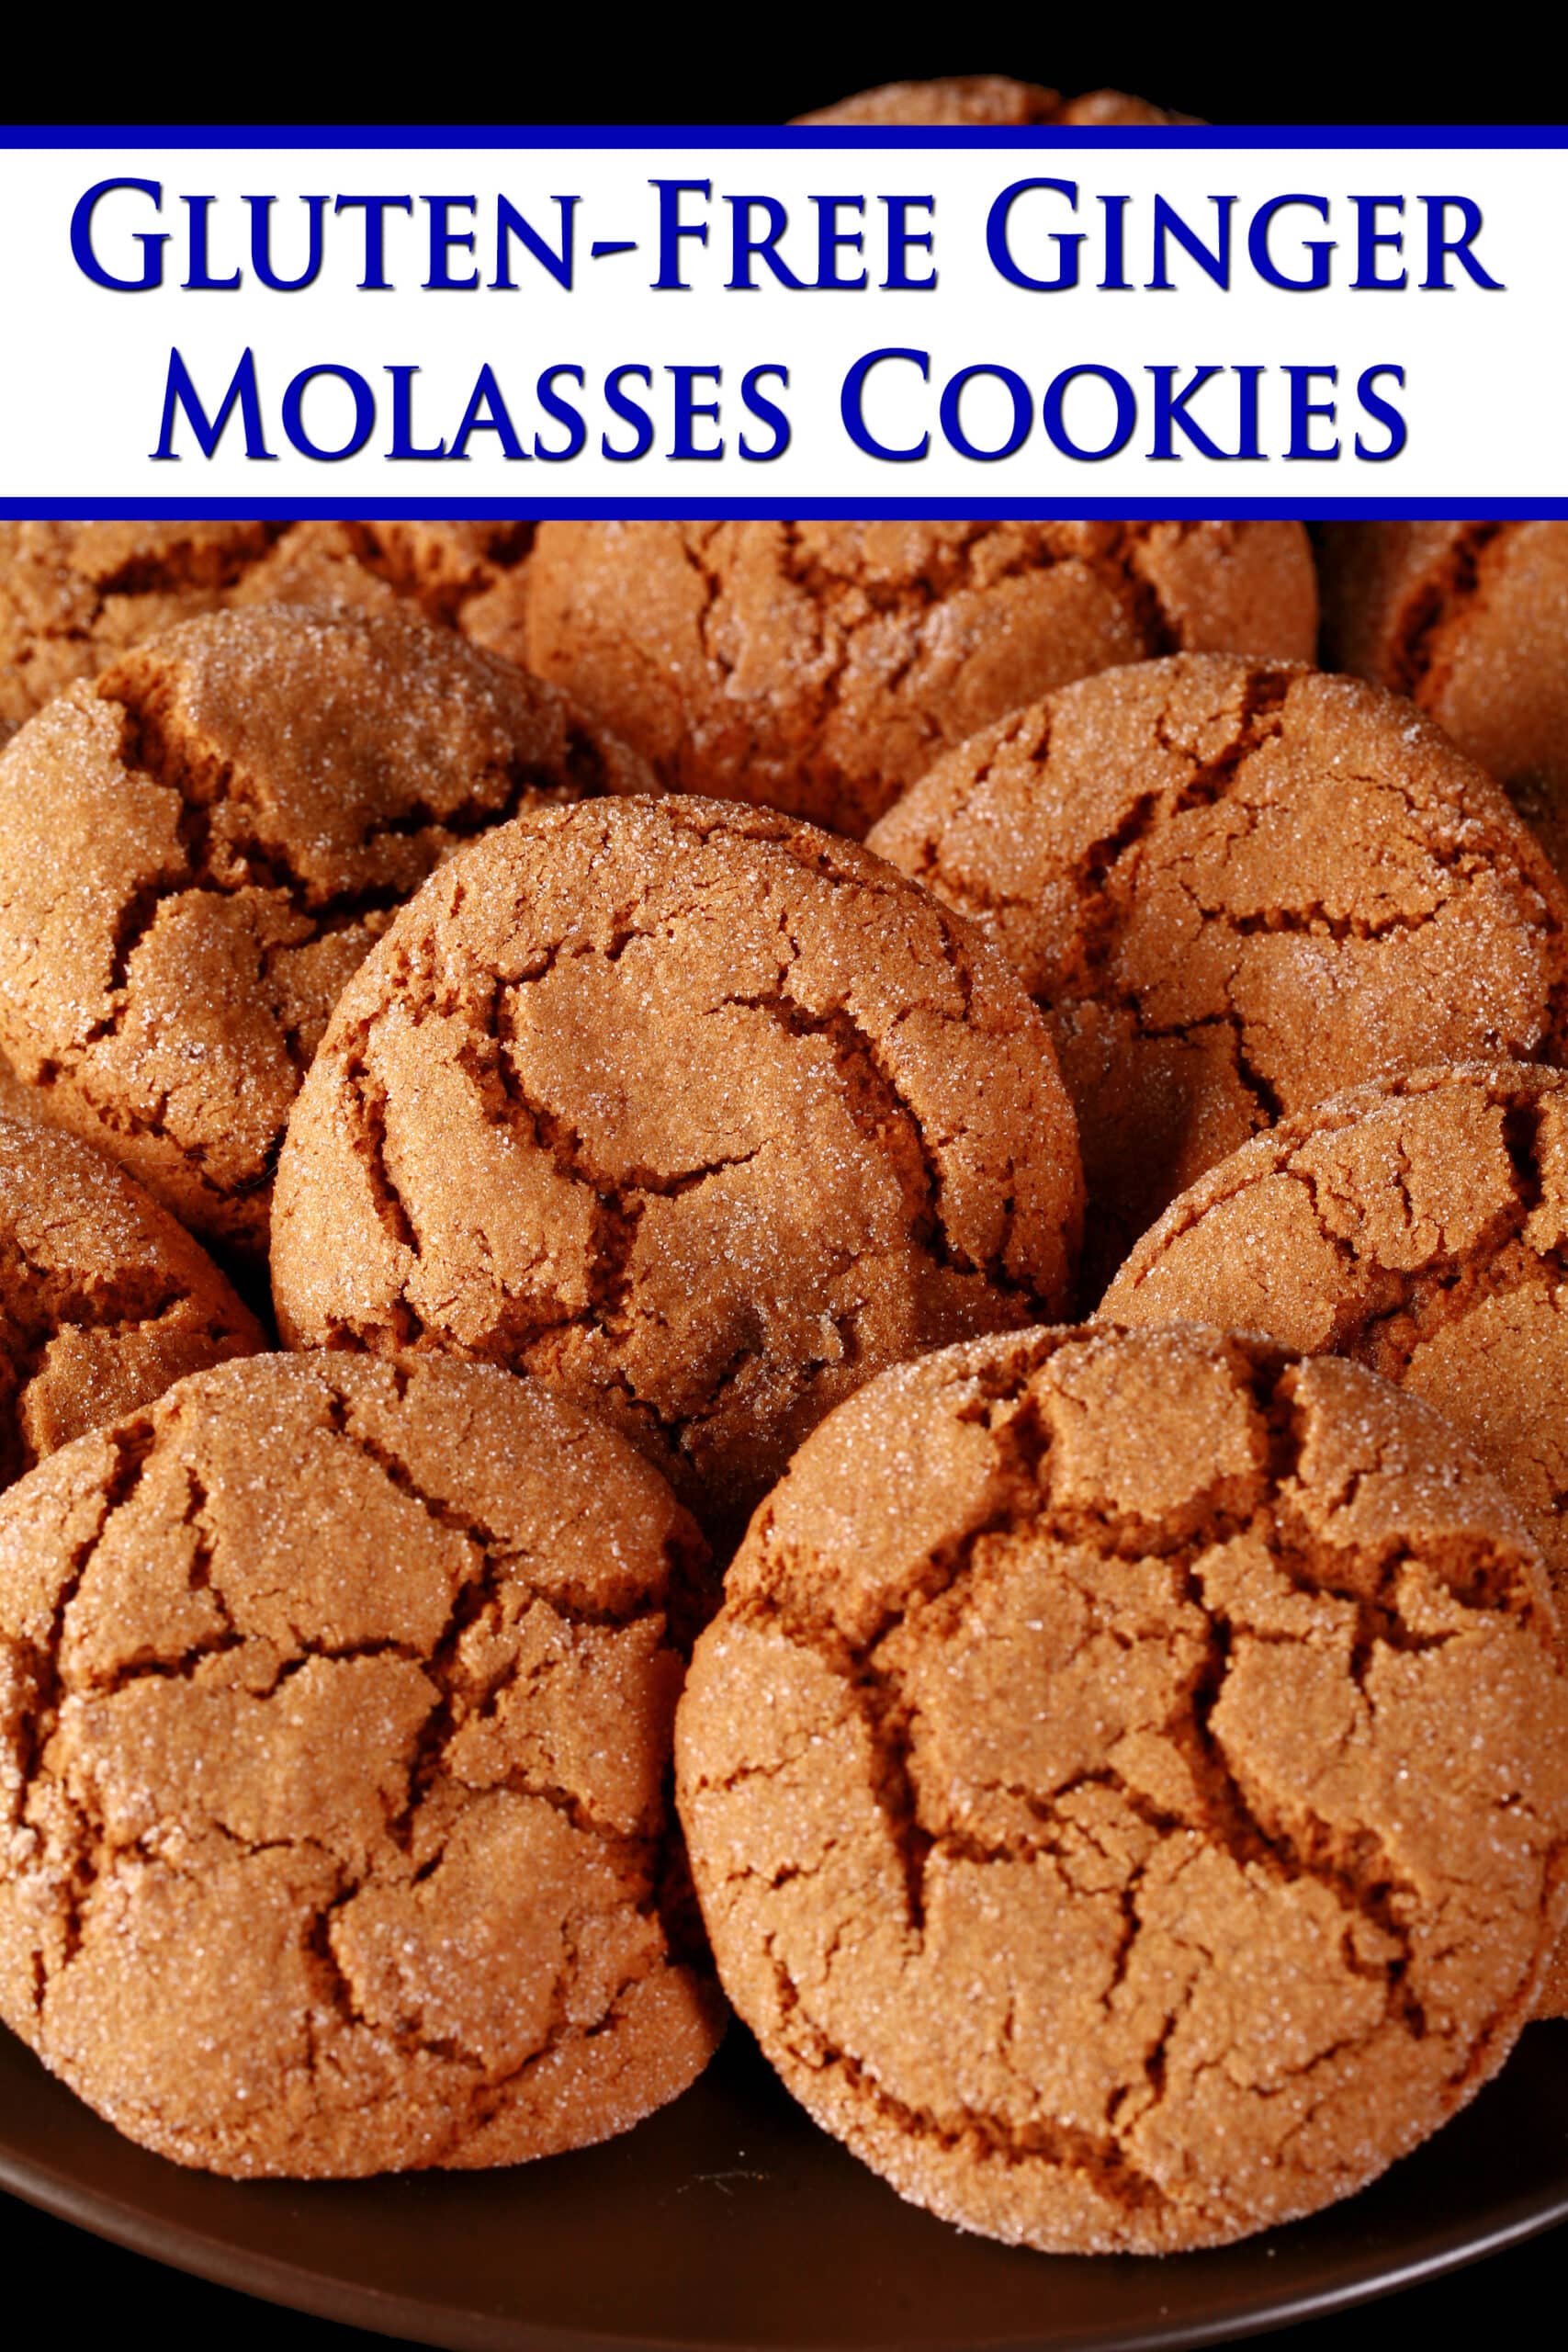 A plate of gluten free molasses cookies. Overlaid text says gluten free ginger molasses cookies.